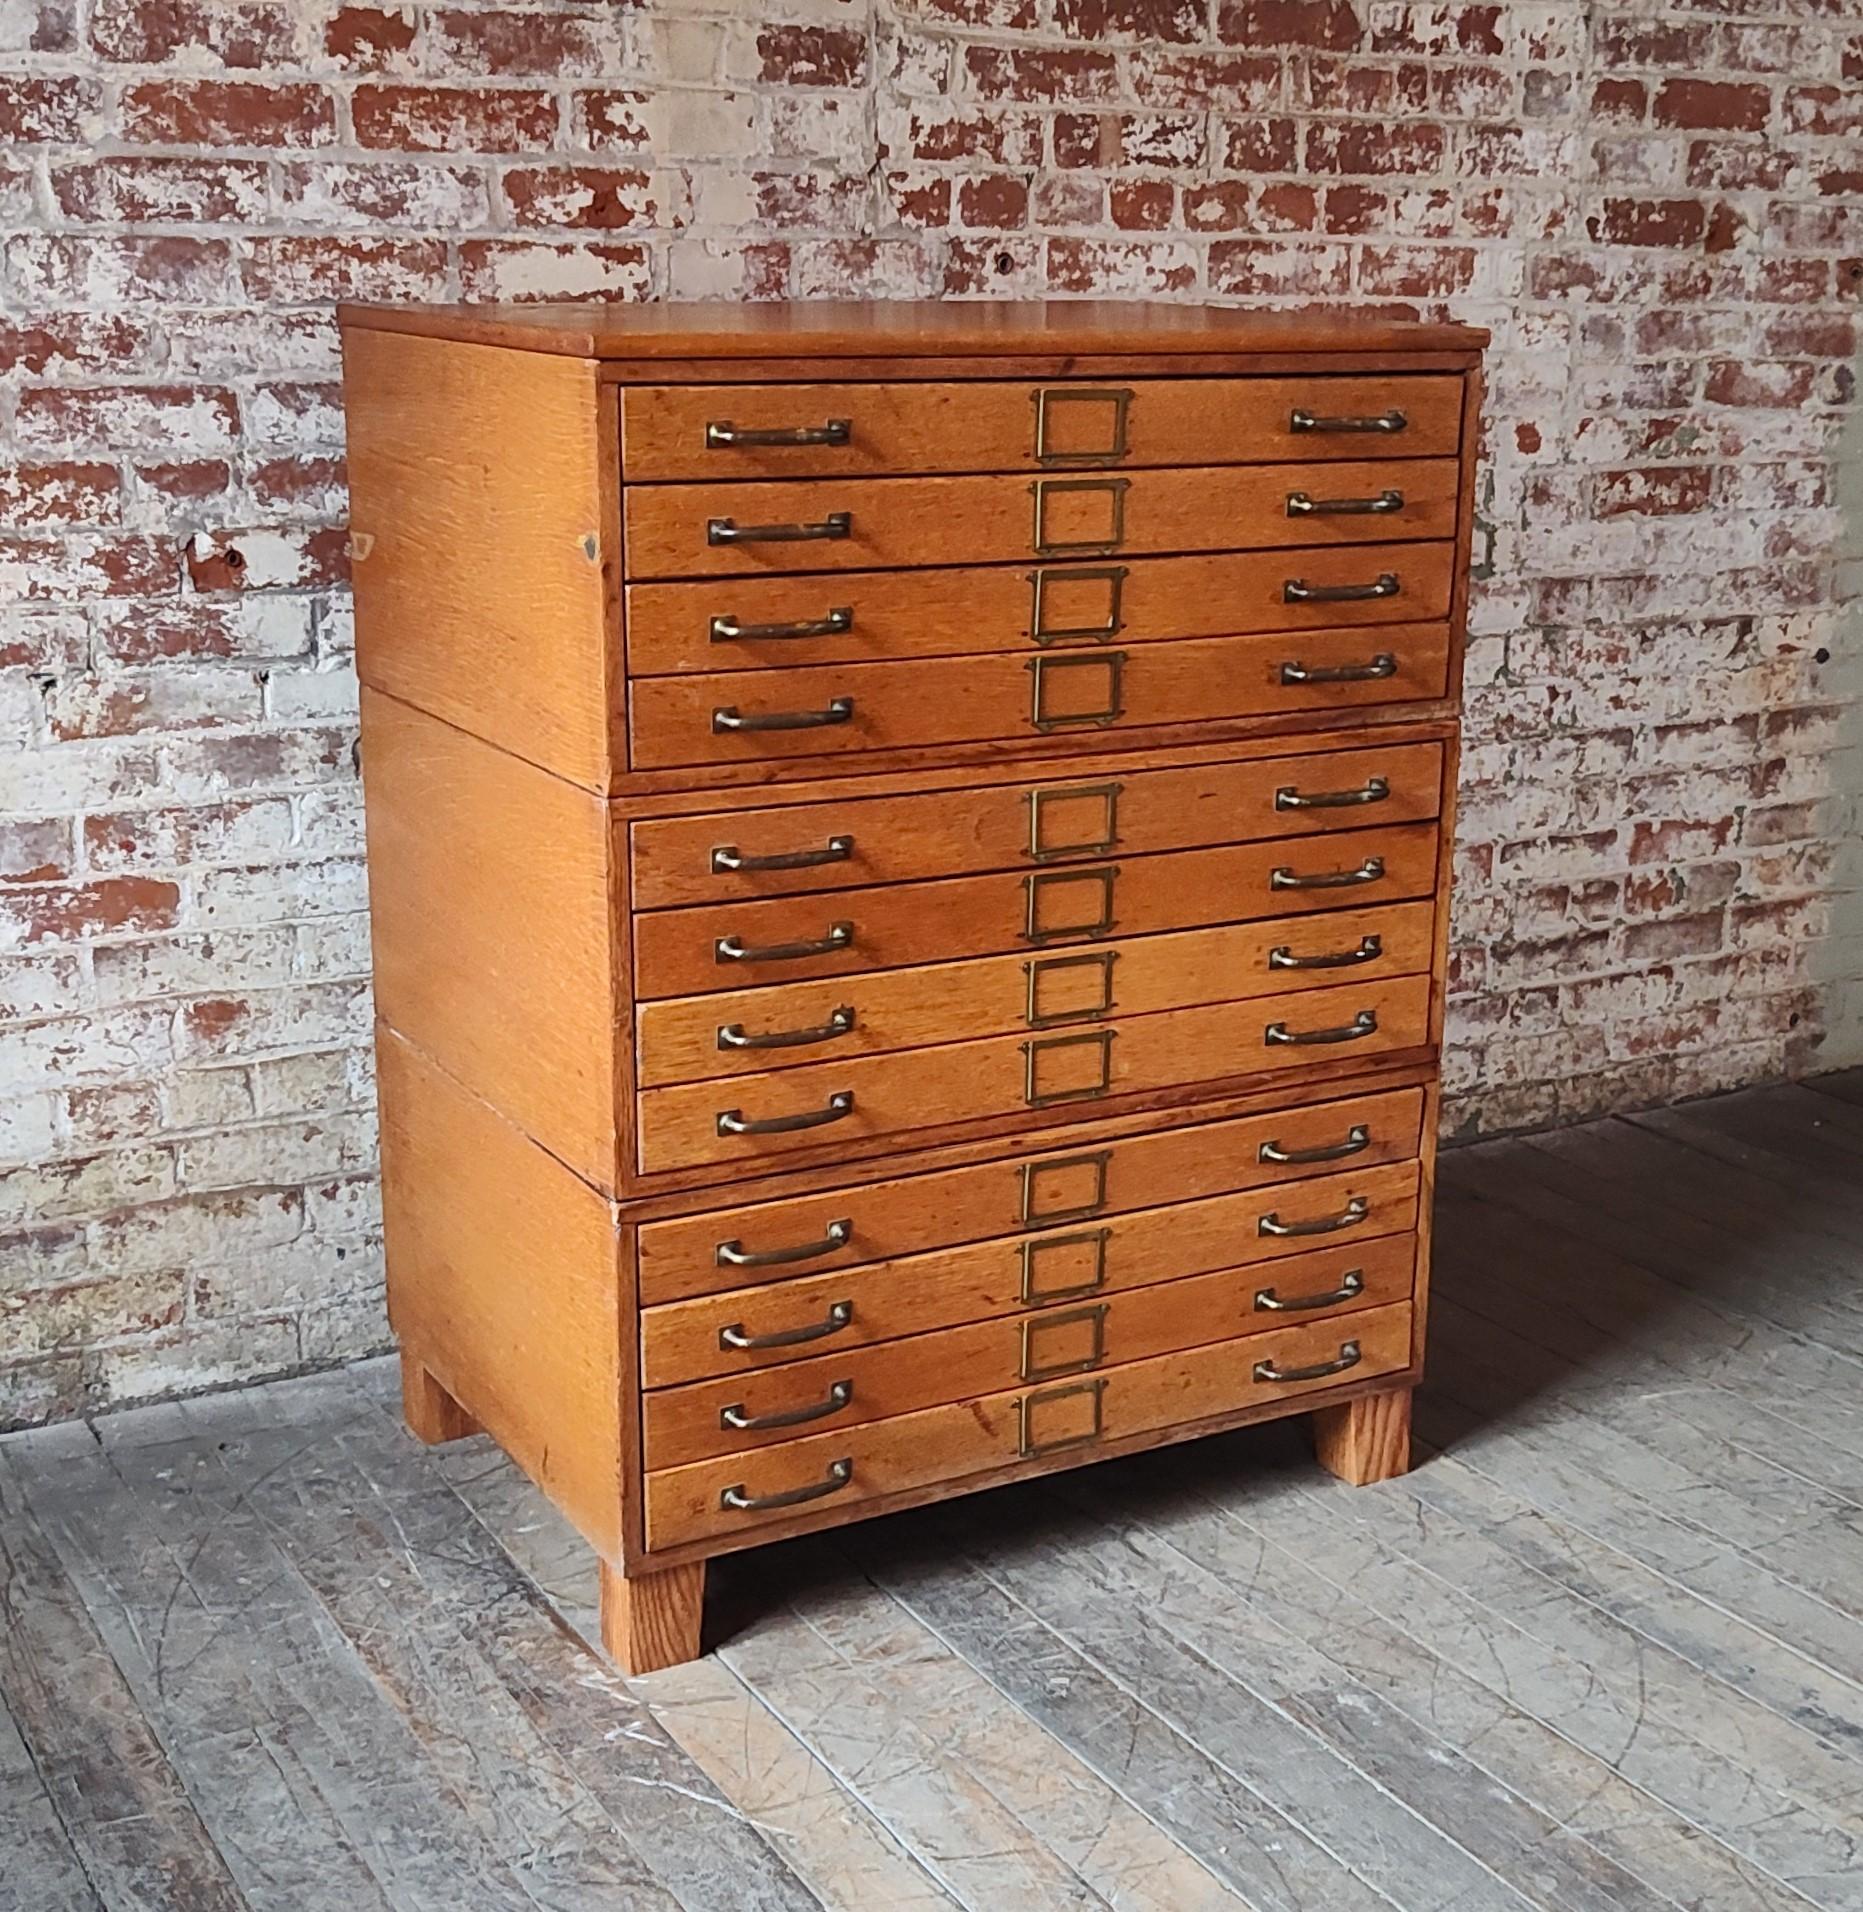 12 Drawer Oak Blueprint / Flat File Cabinet

Overall Dimensions: 25 1/4